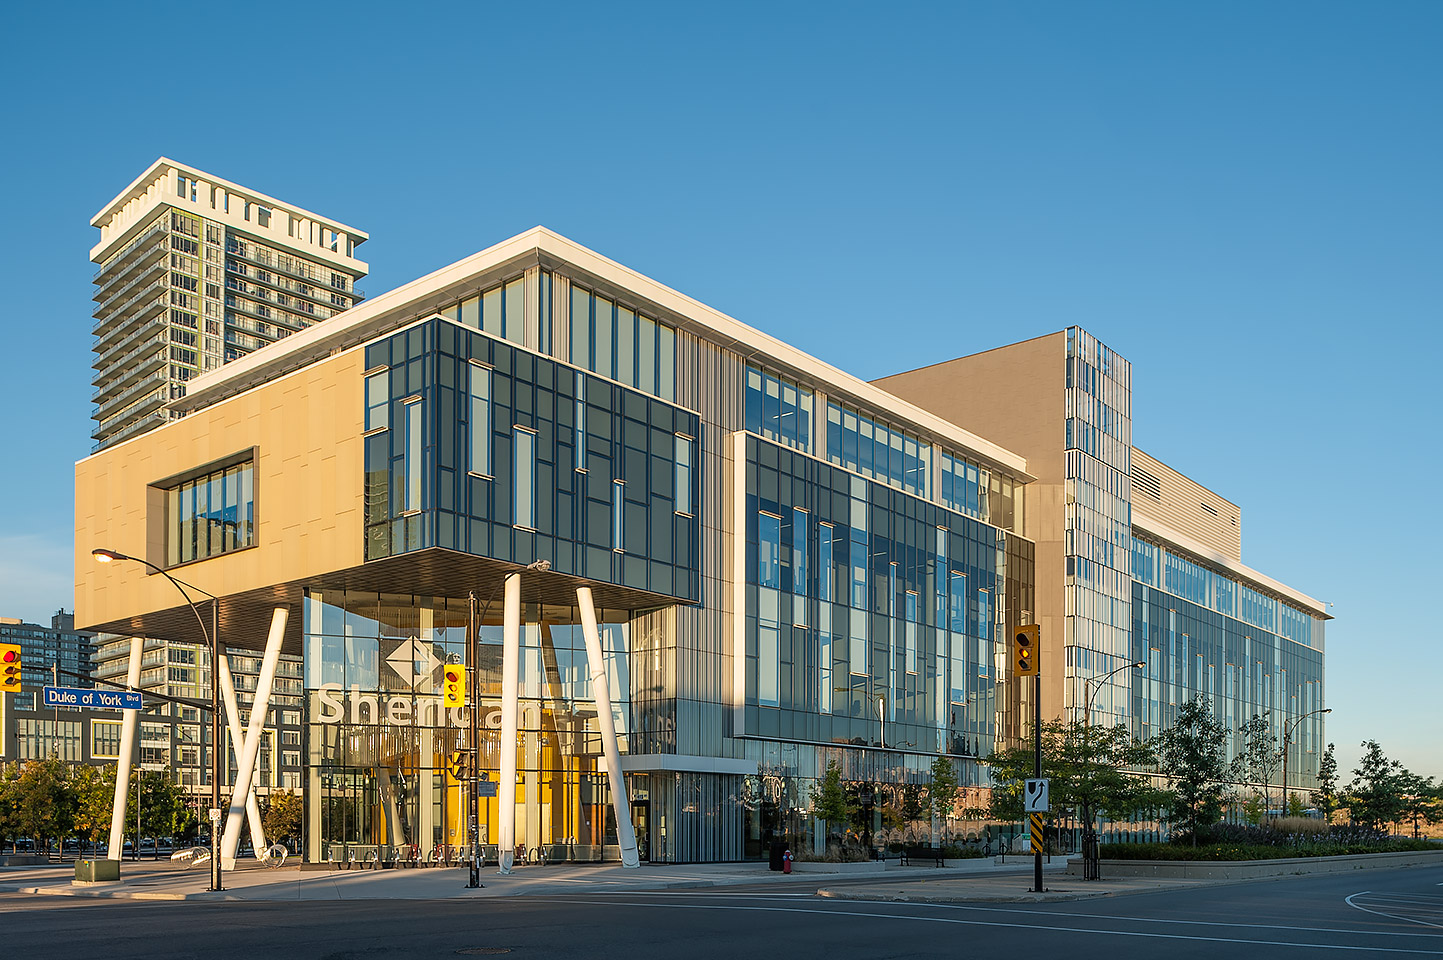 Image of Sheridan College campus